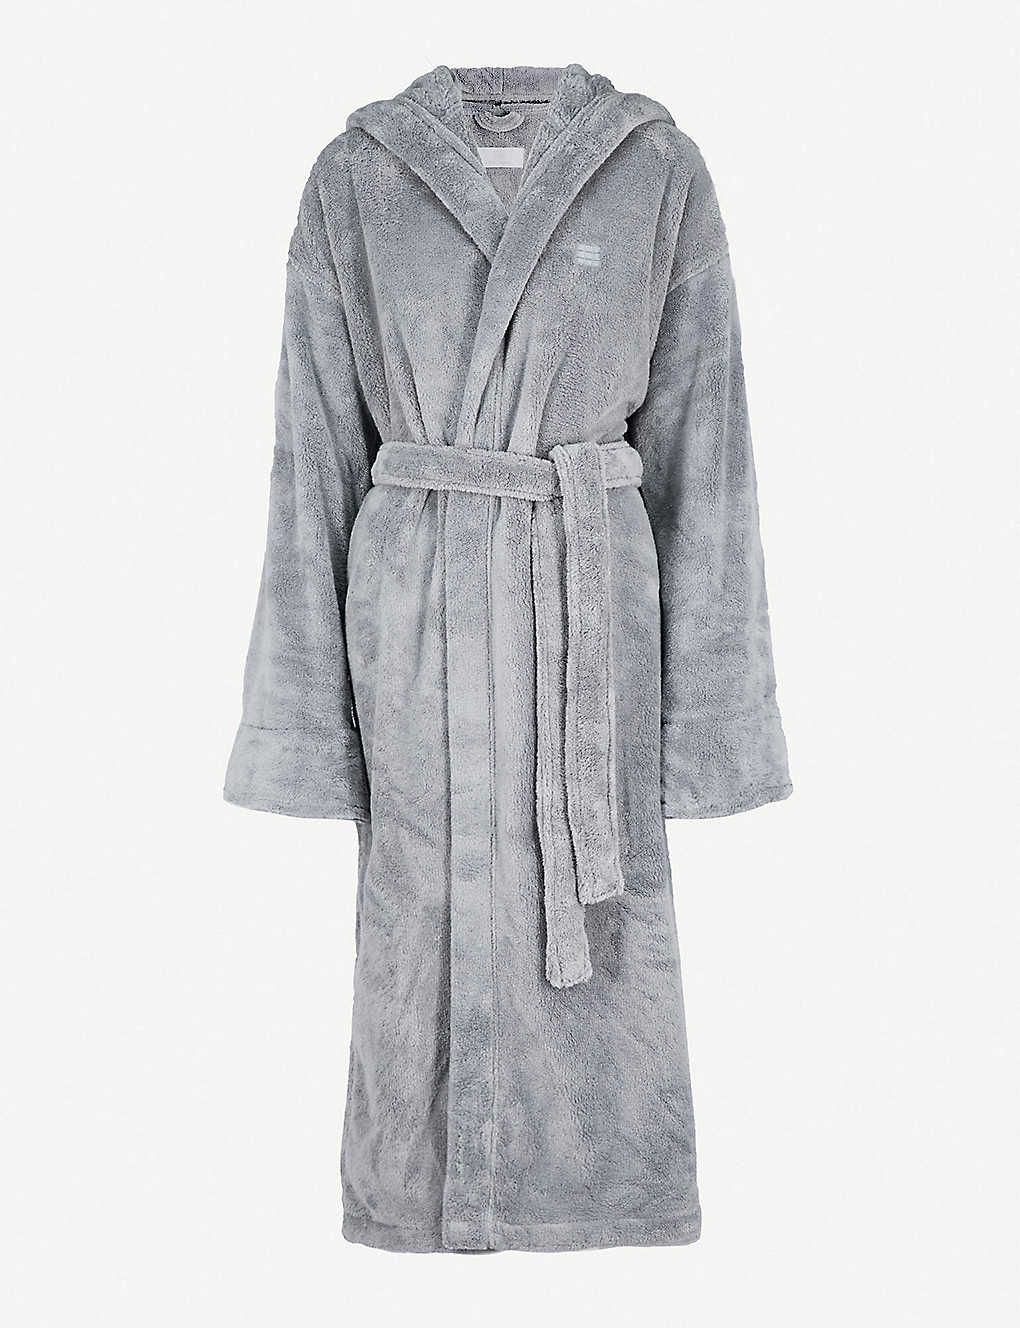 Womens dressing gowns - 21 best 